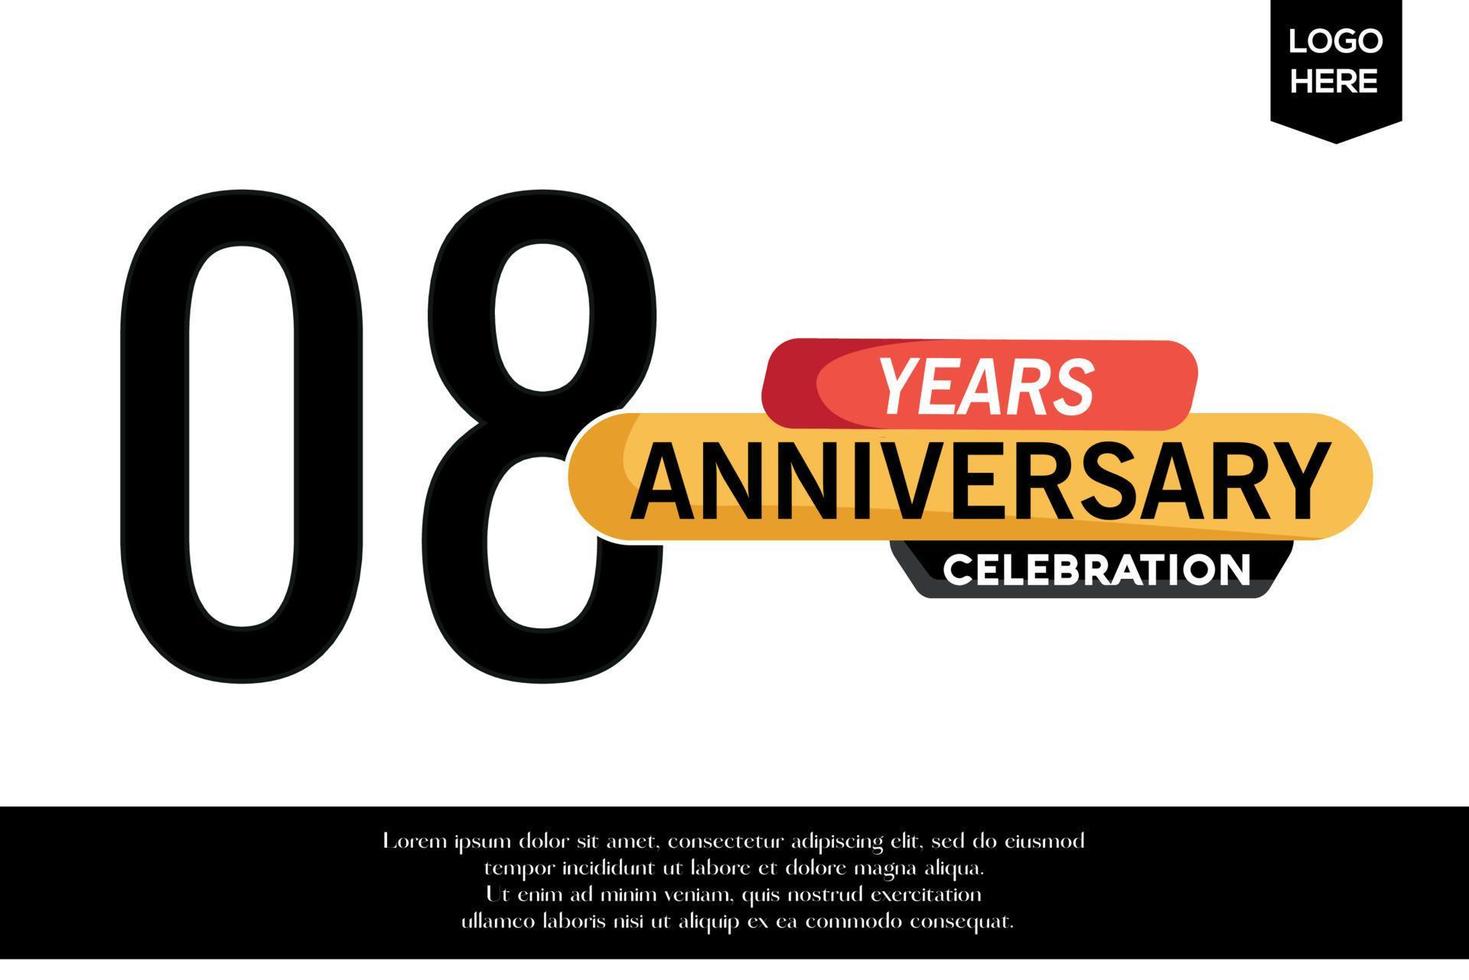 08th anniversary celebration logotype black yellow colored with text in gray color isolated on white background vector template design